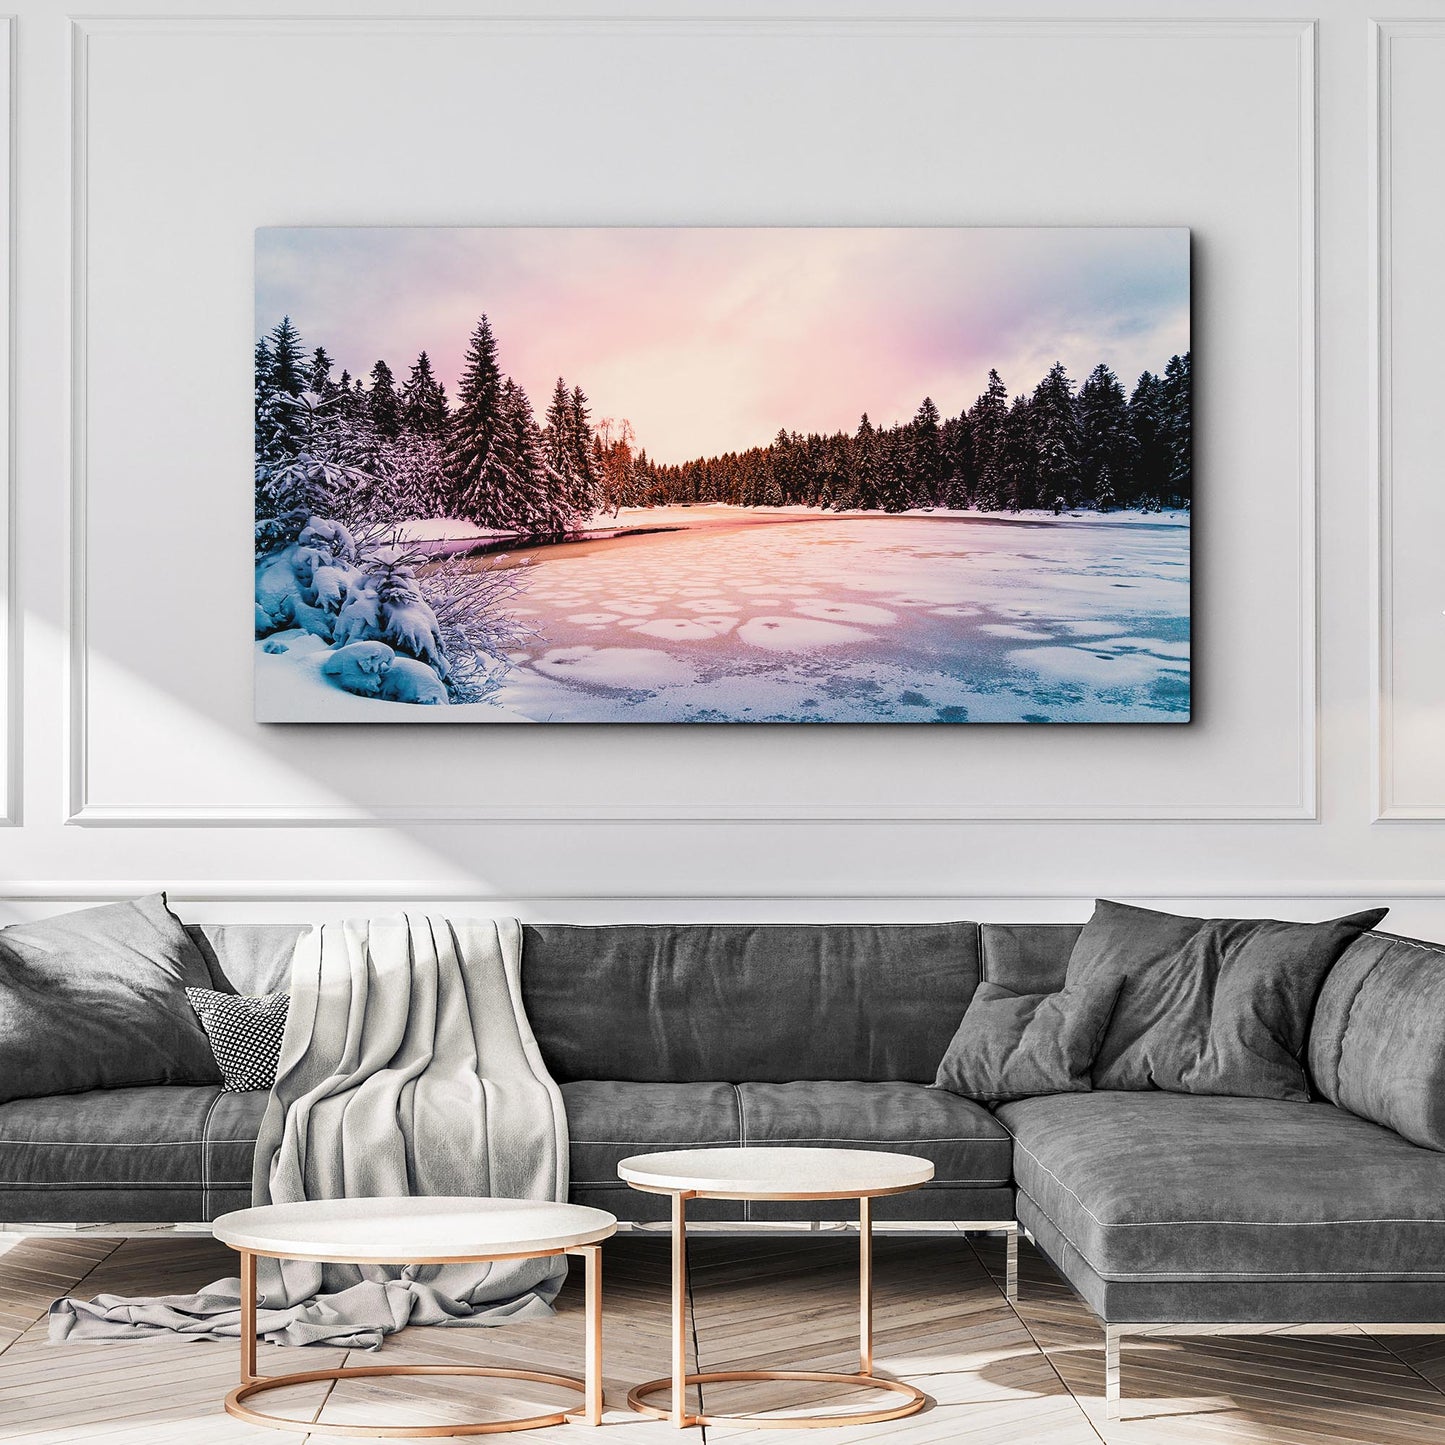 Winter Lake Wonderland Canvas Wall Art Style 2 - Image by Tailored Canvases